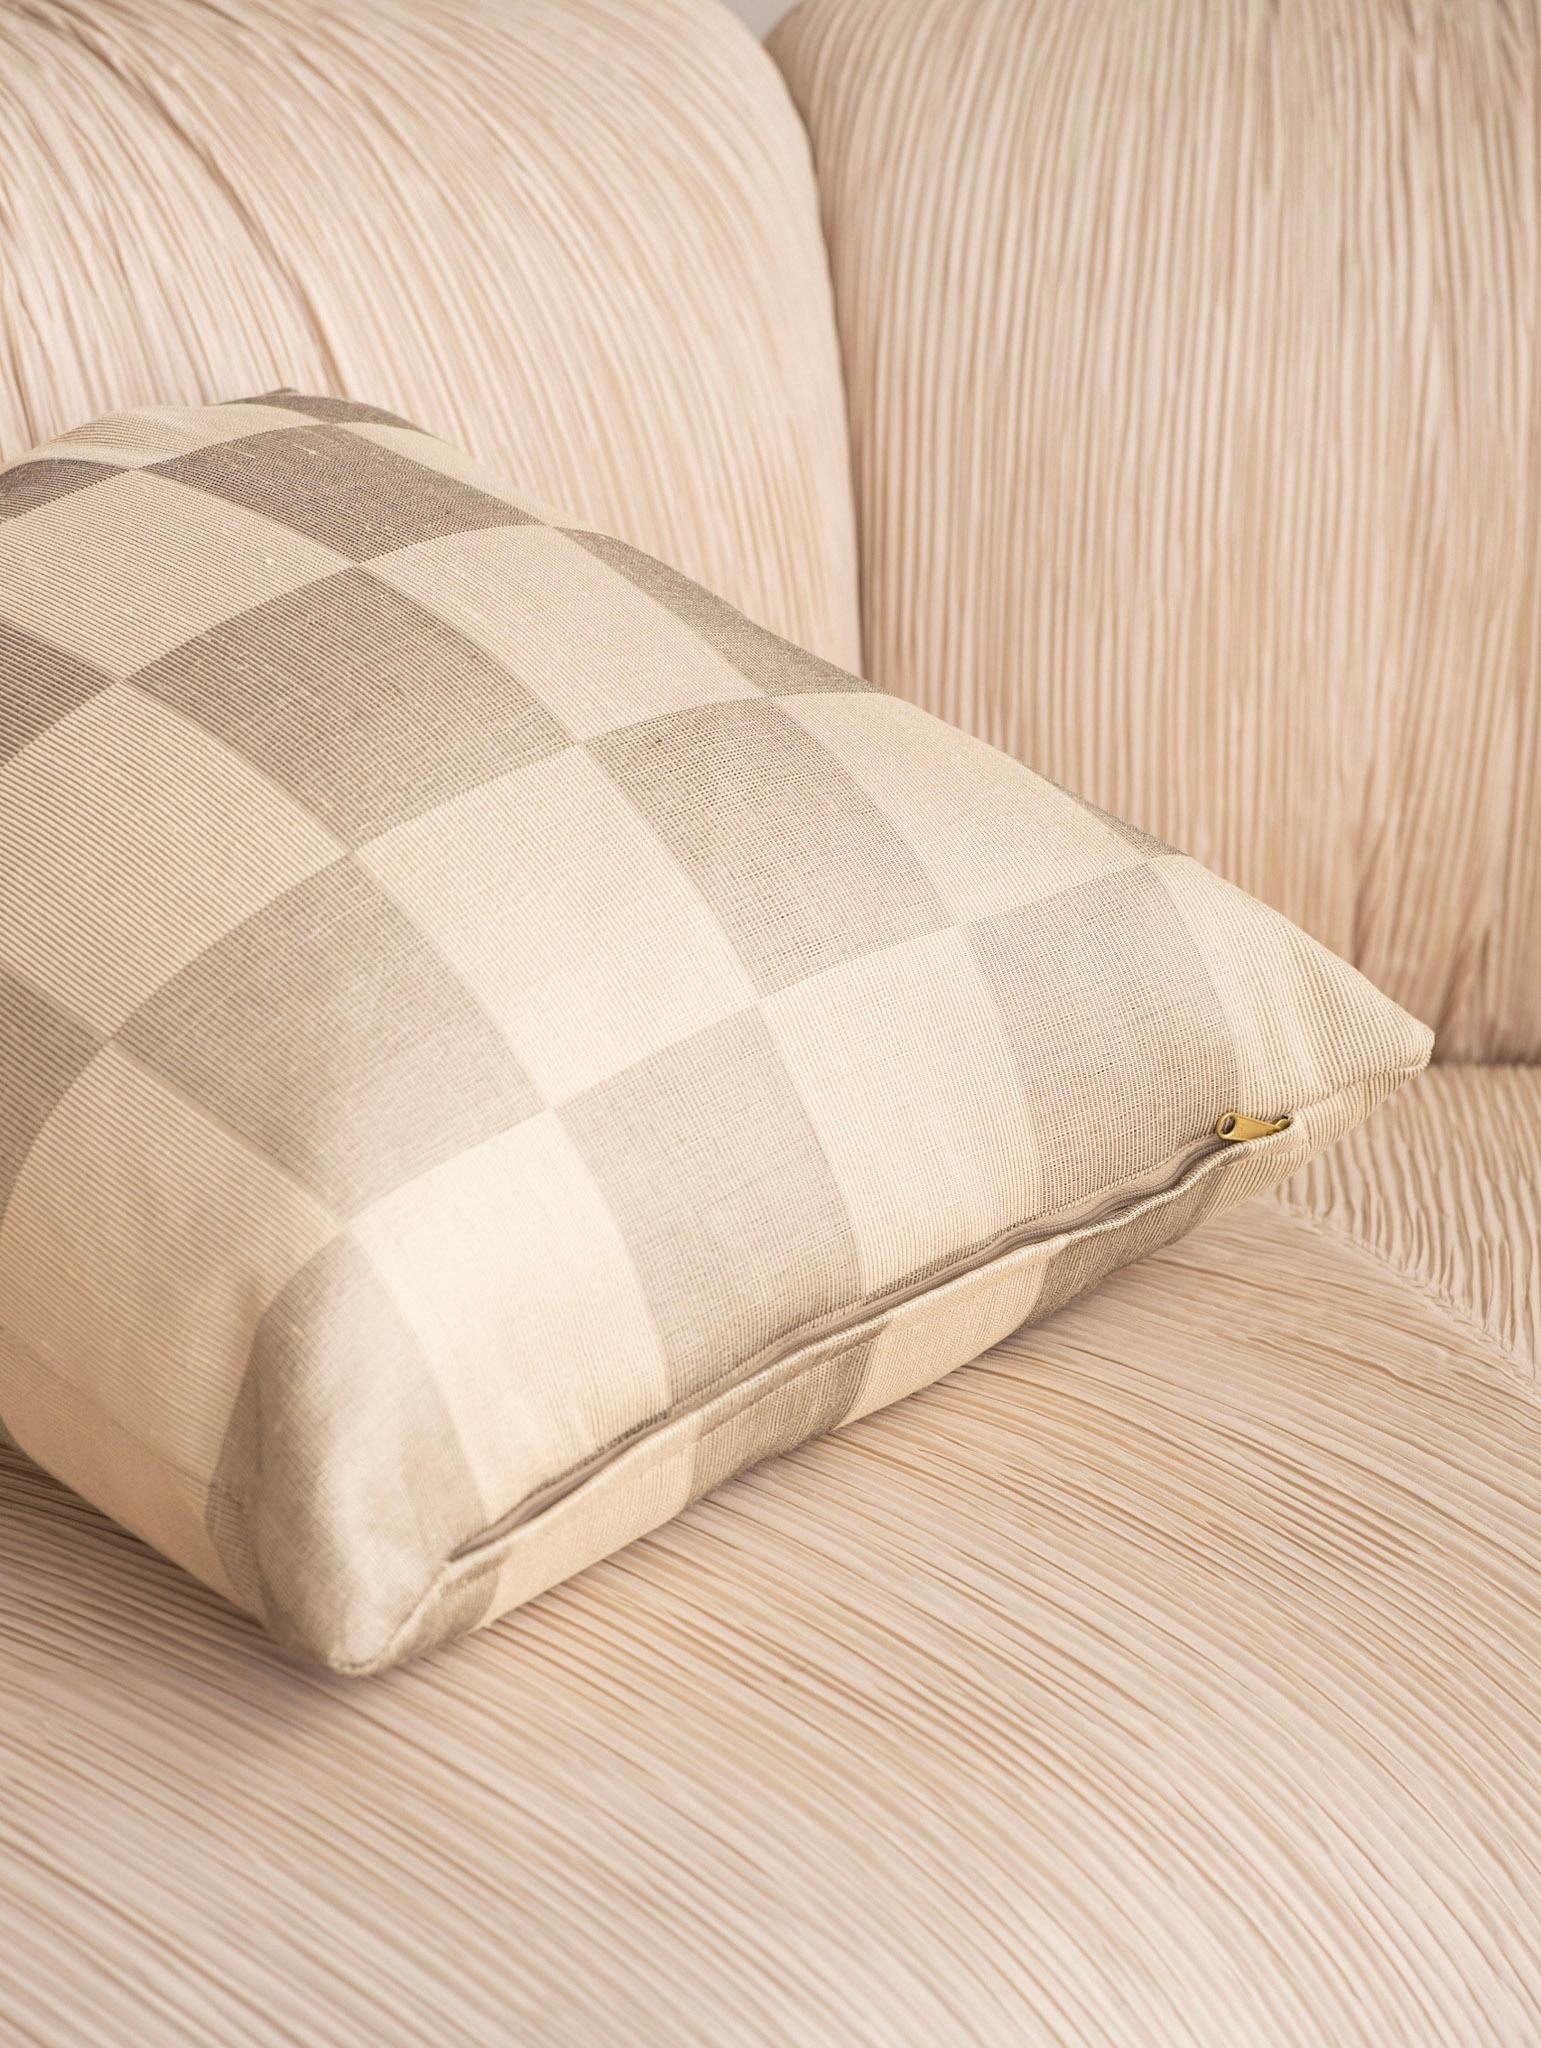 Textured Grey & Ivory Checkered Pillow In New Condition For Sale In Brooklyn, NY